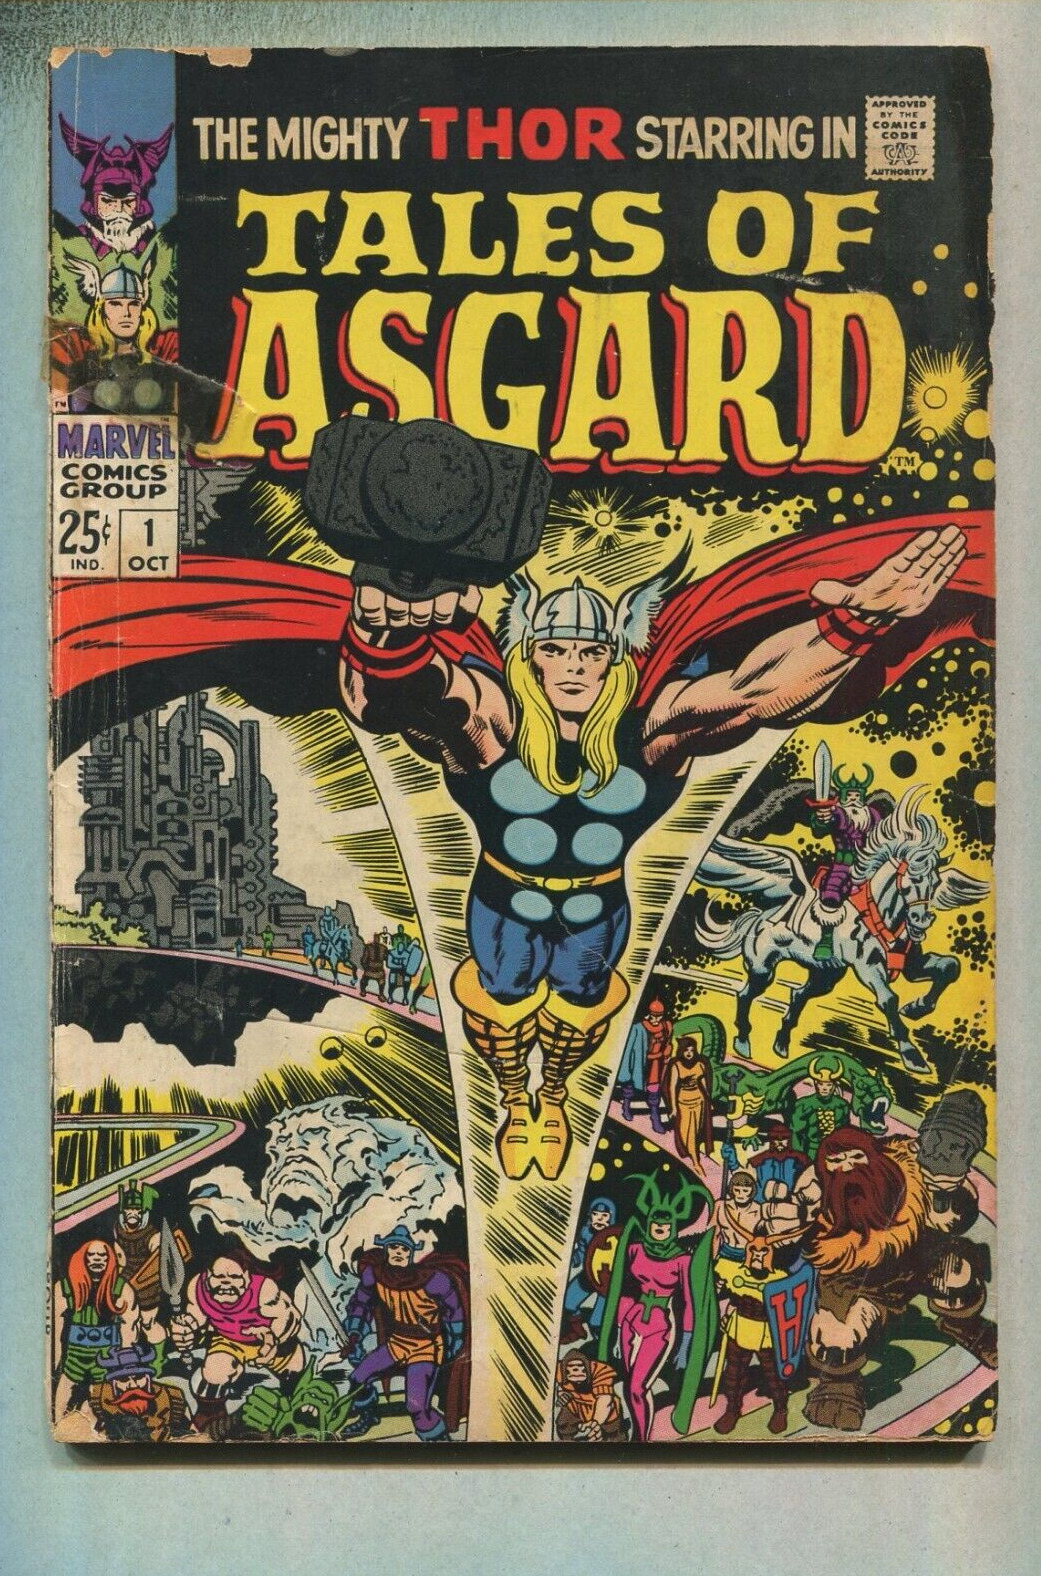 The Mighty Thor: Tales Of Asgard # 1 GD  Marvel Comics  D3